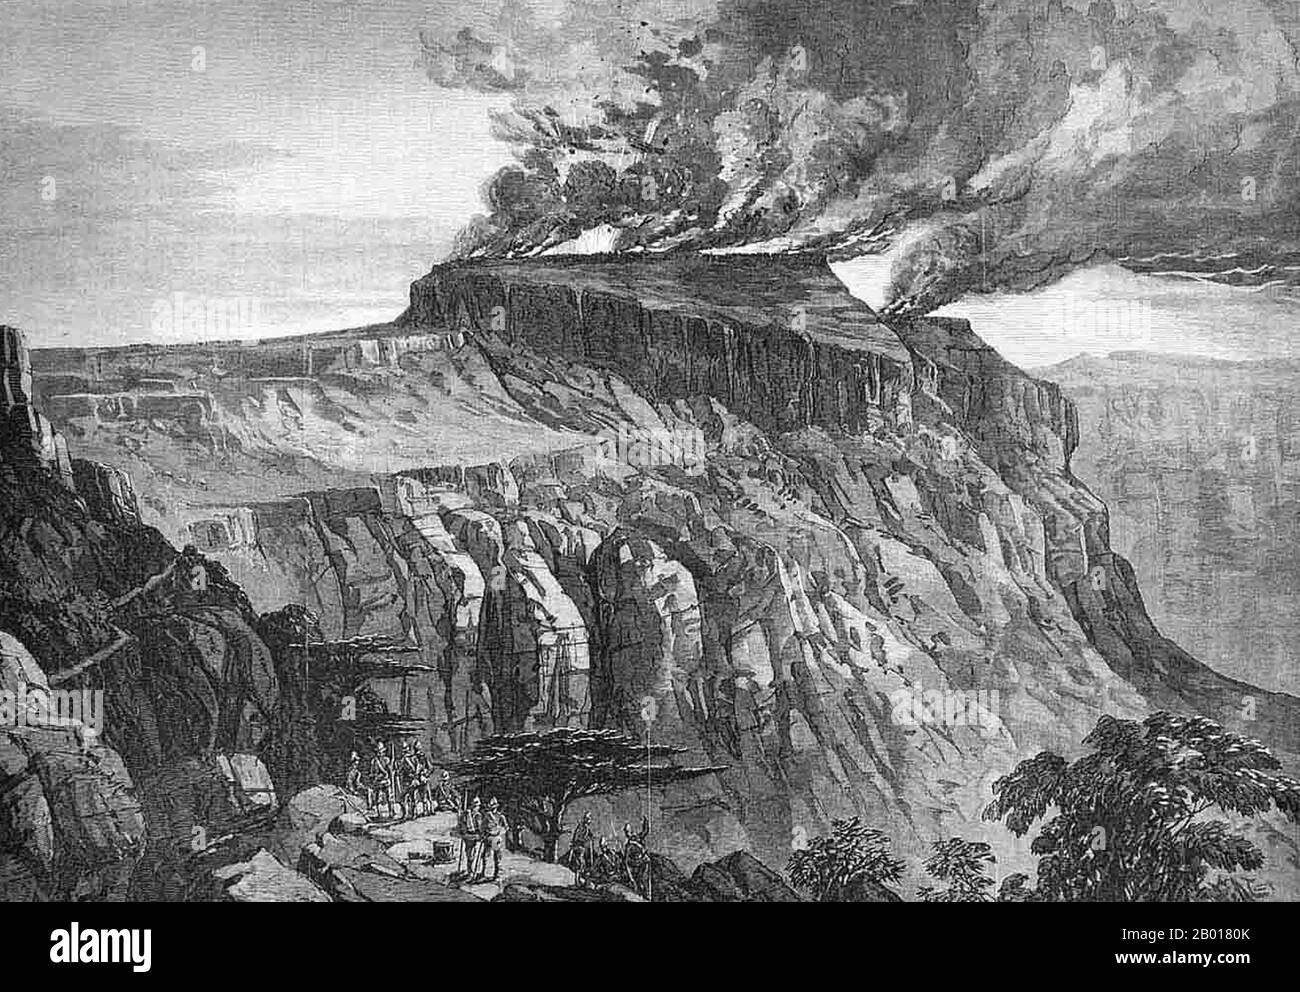 Ethiopia: 'The Destruction of Magdala'. Engraving from the 'Illustrated London News', c. 1868.  The British 1868 Expedition to Abyssinia was a punitive expedition carried out by armed forces of the British Empire against the Ethiopian Empire. Emperor Tewodros II of Ethiopia, also known as 'Theodore', imprisoned several missionaries and two representatives of the British government. The punitive expedition launched by the British in response required the transportation of a sizable military force hundreds of miles across mountainous terrain lacking any road system. Stock Photo